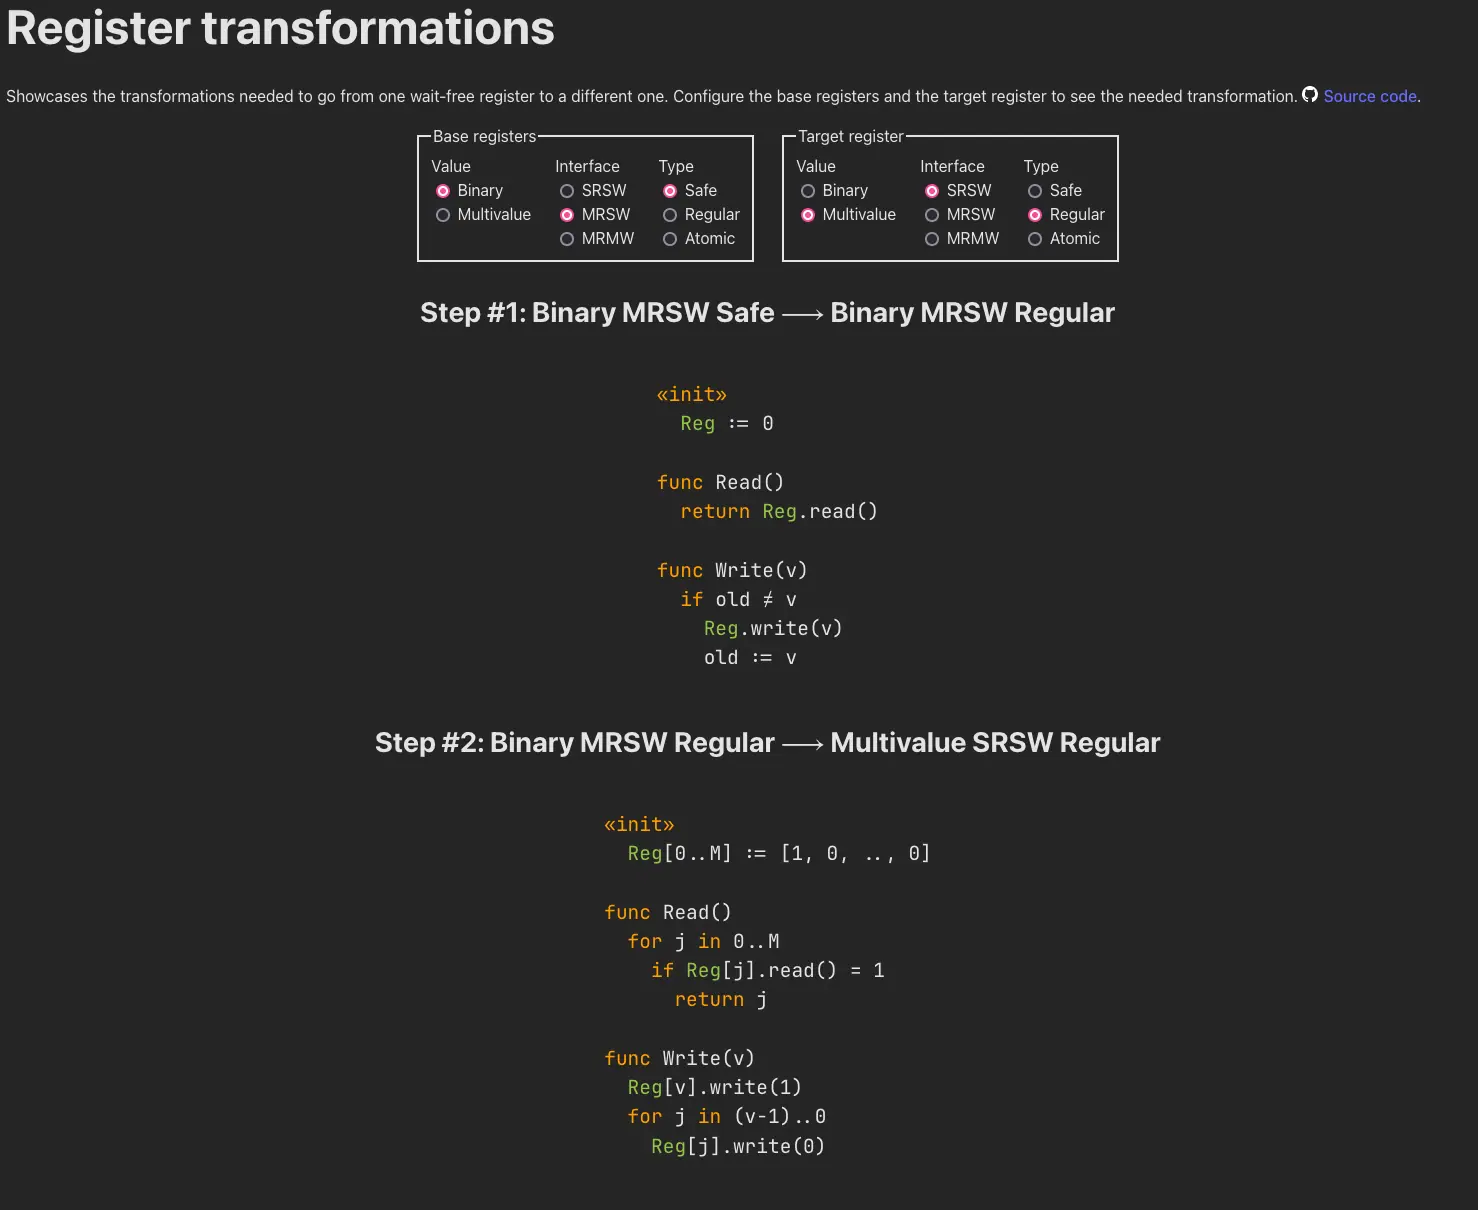 Example of a register transformation from a binary safe single-writer multi-reader register to a multivalue regular single-writer single-reader register